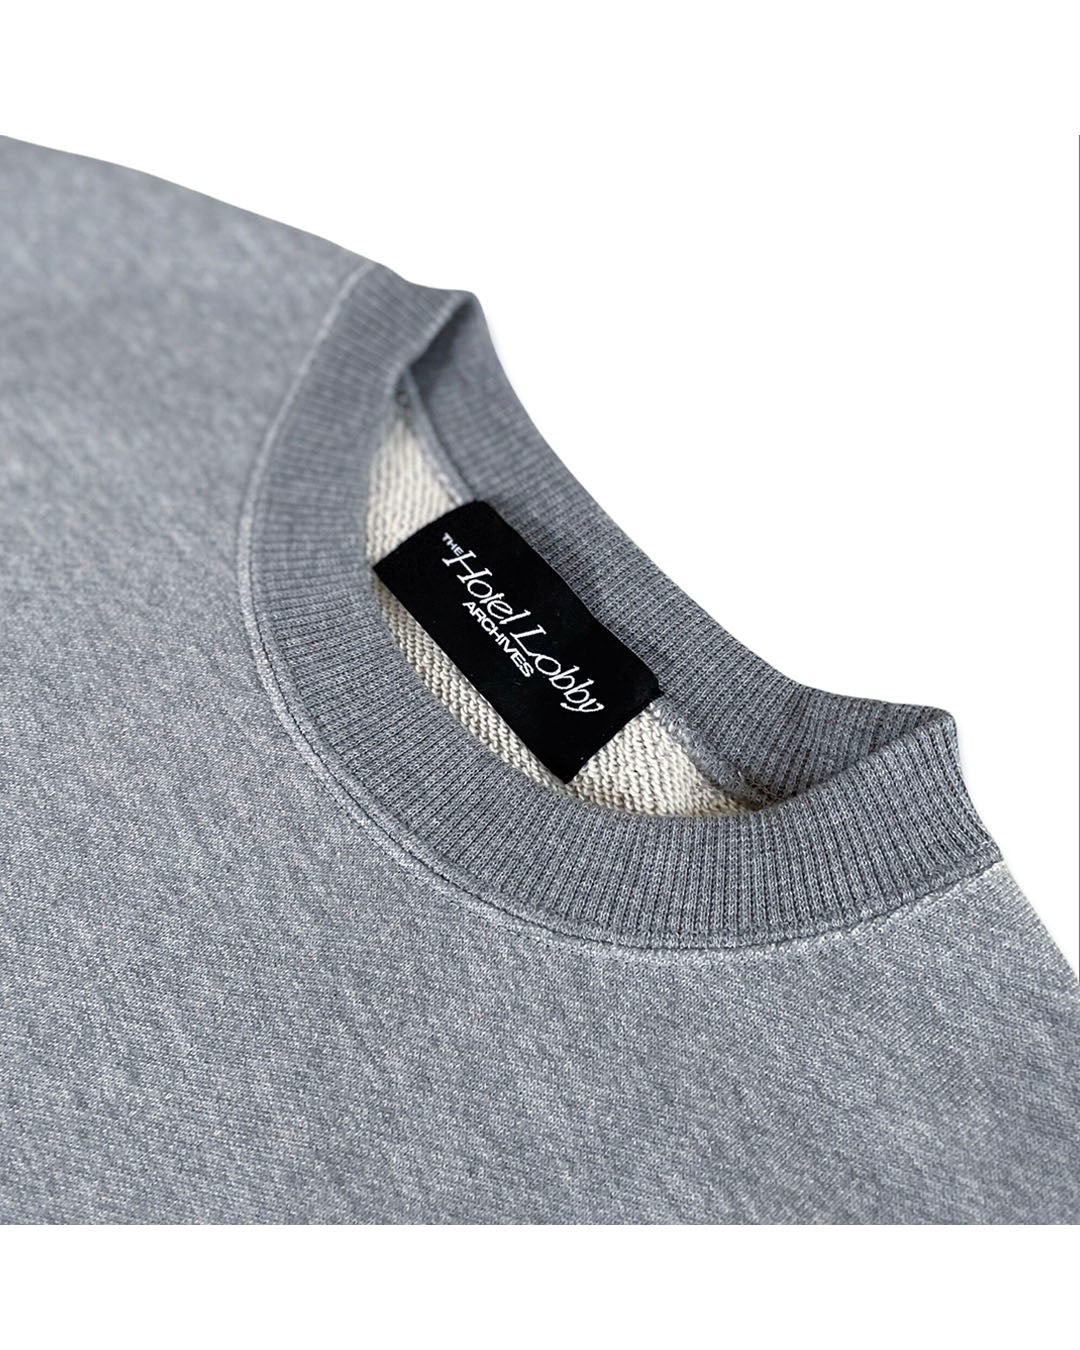 【THE HOTEL LOBBY ARCHIVES】PLANE SWEAT SHIRT - GRAY